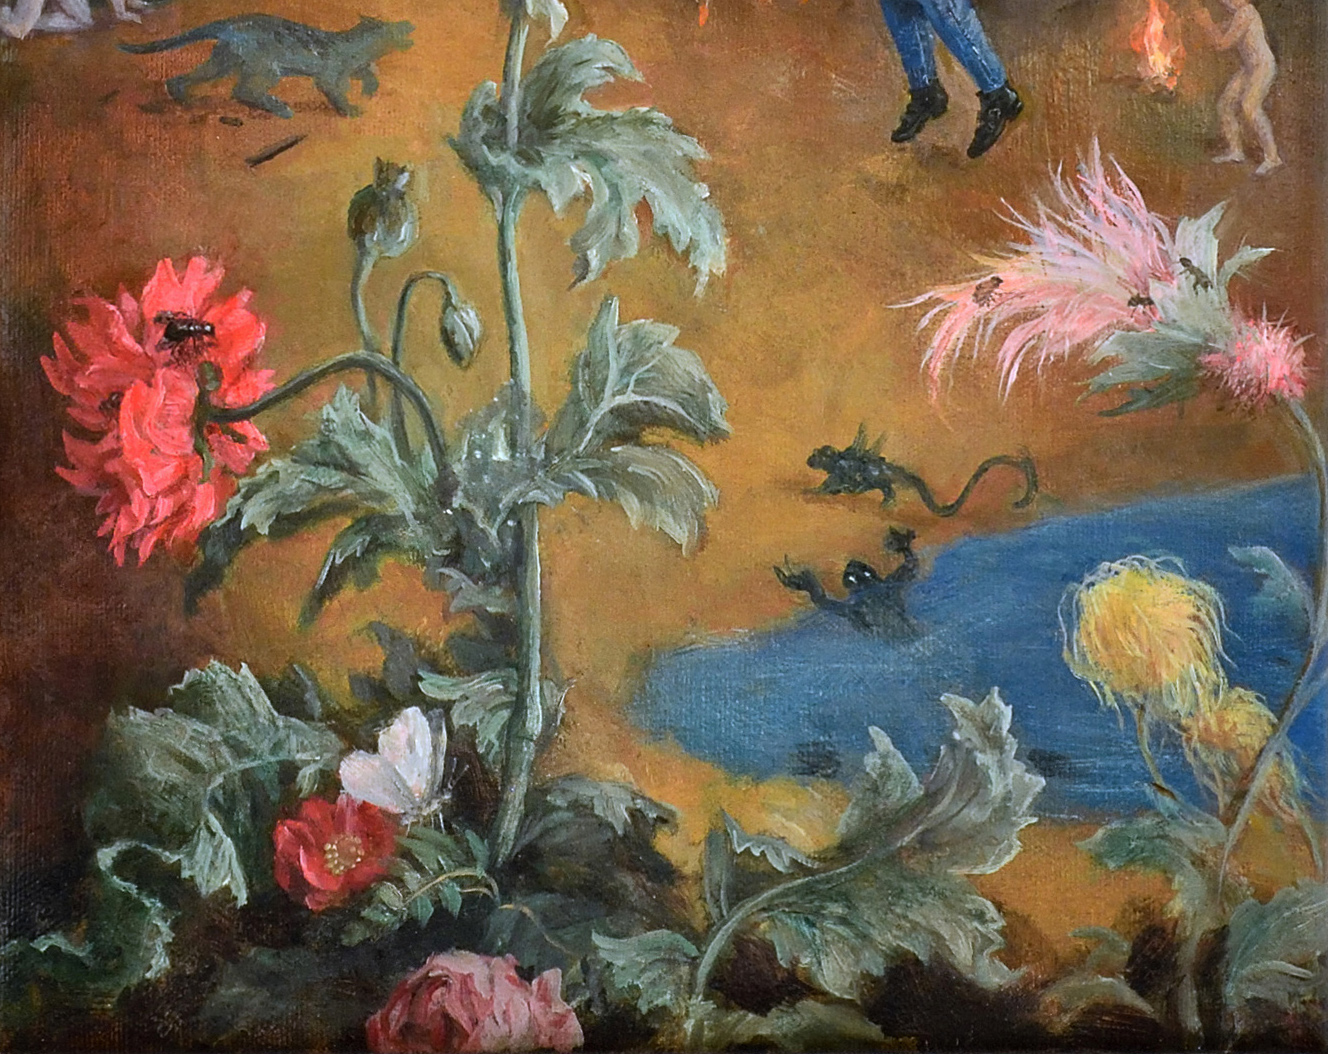 Contemporary realism - Detail of "Planetary"